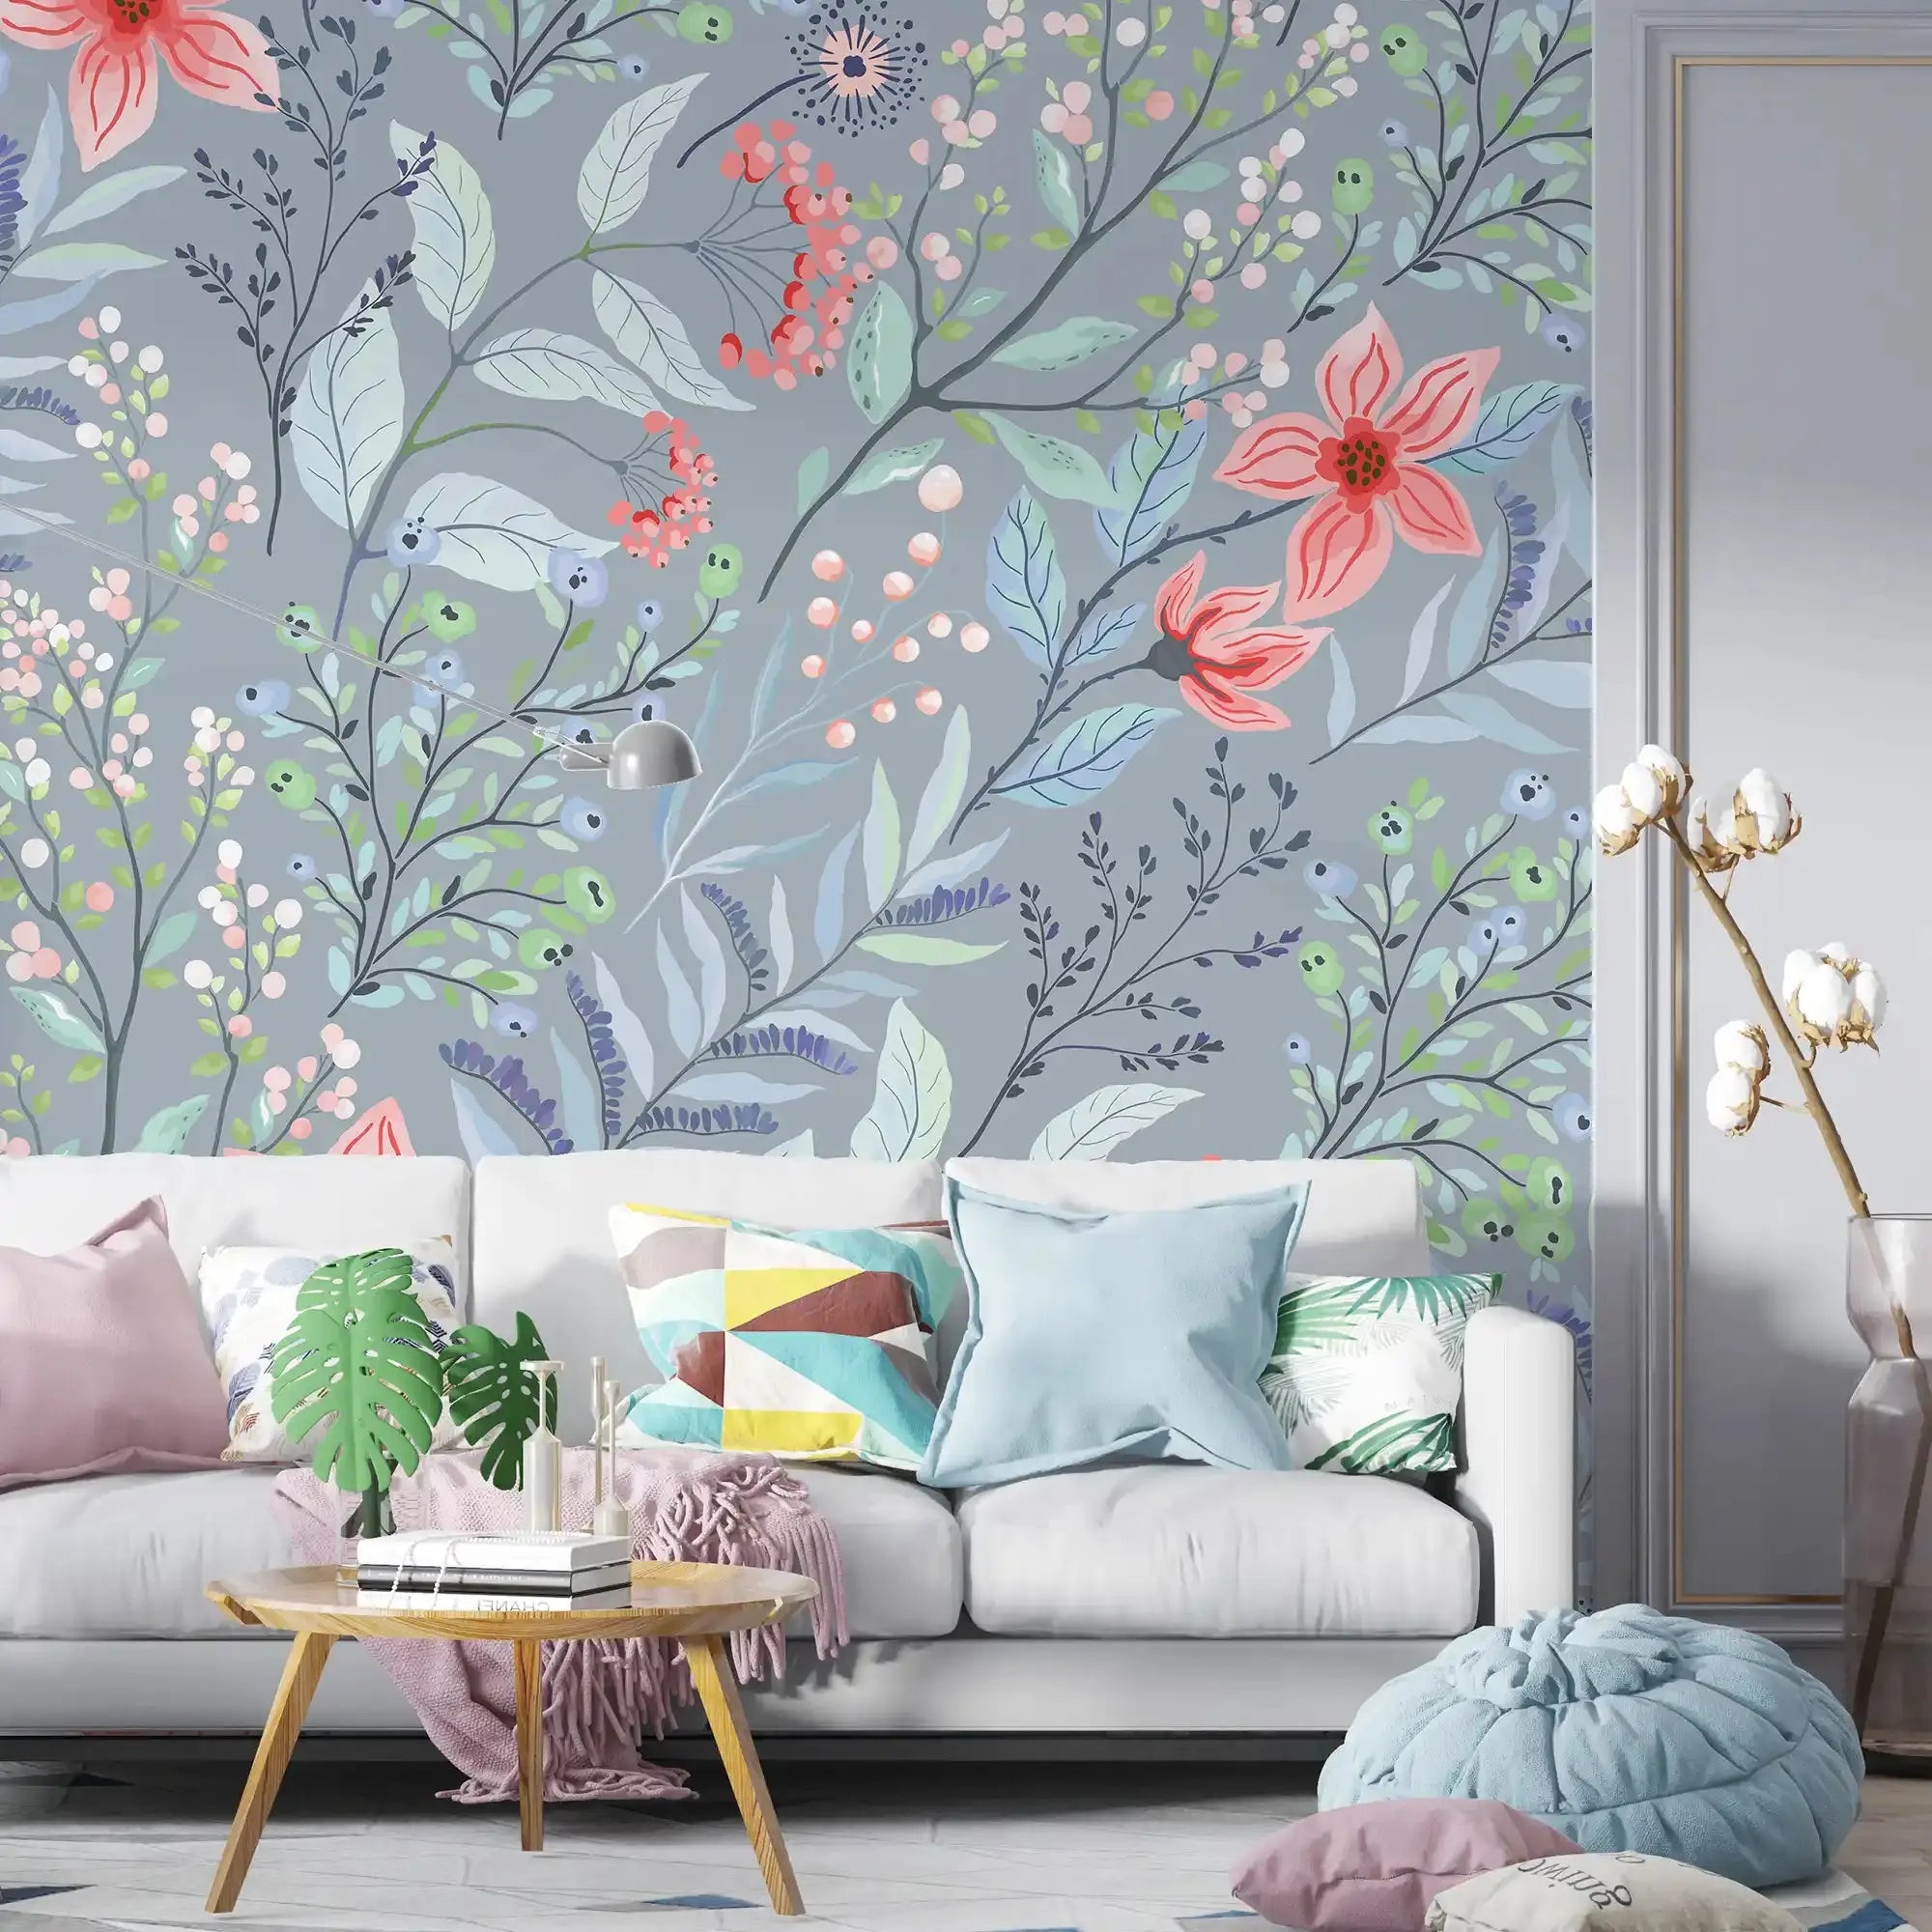 3105-B / Peel and Stick Floral Wallpaper: Pink Flowers and Leaf Design, Easy Apply Wall Decor for Bedroom & Bathroom - Artevella